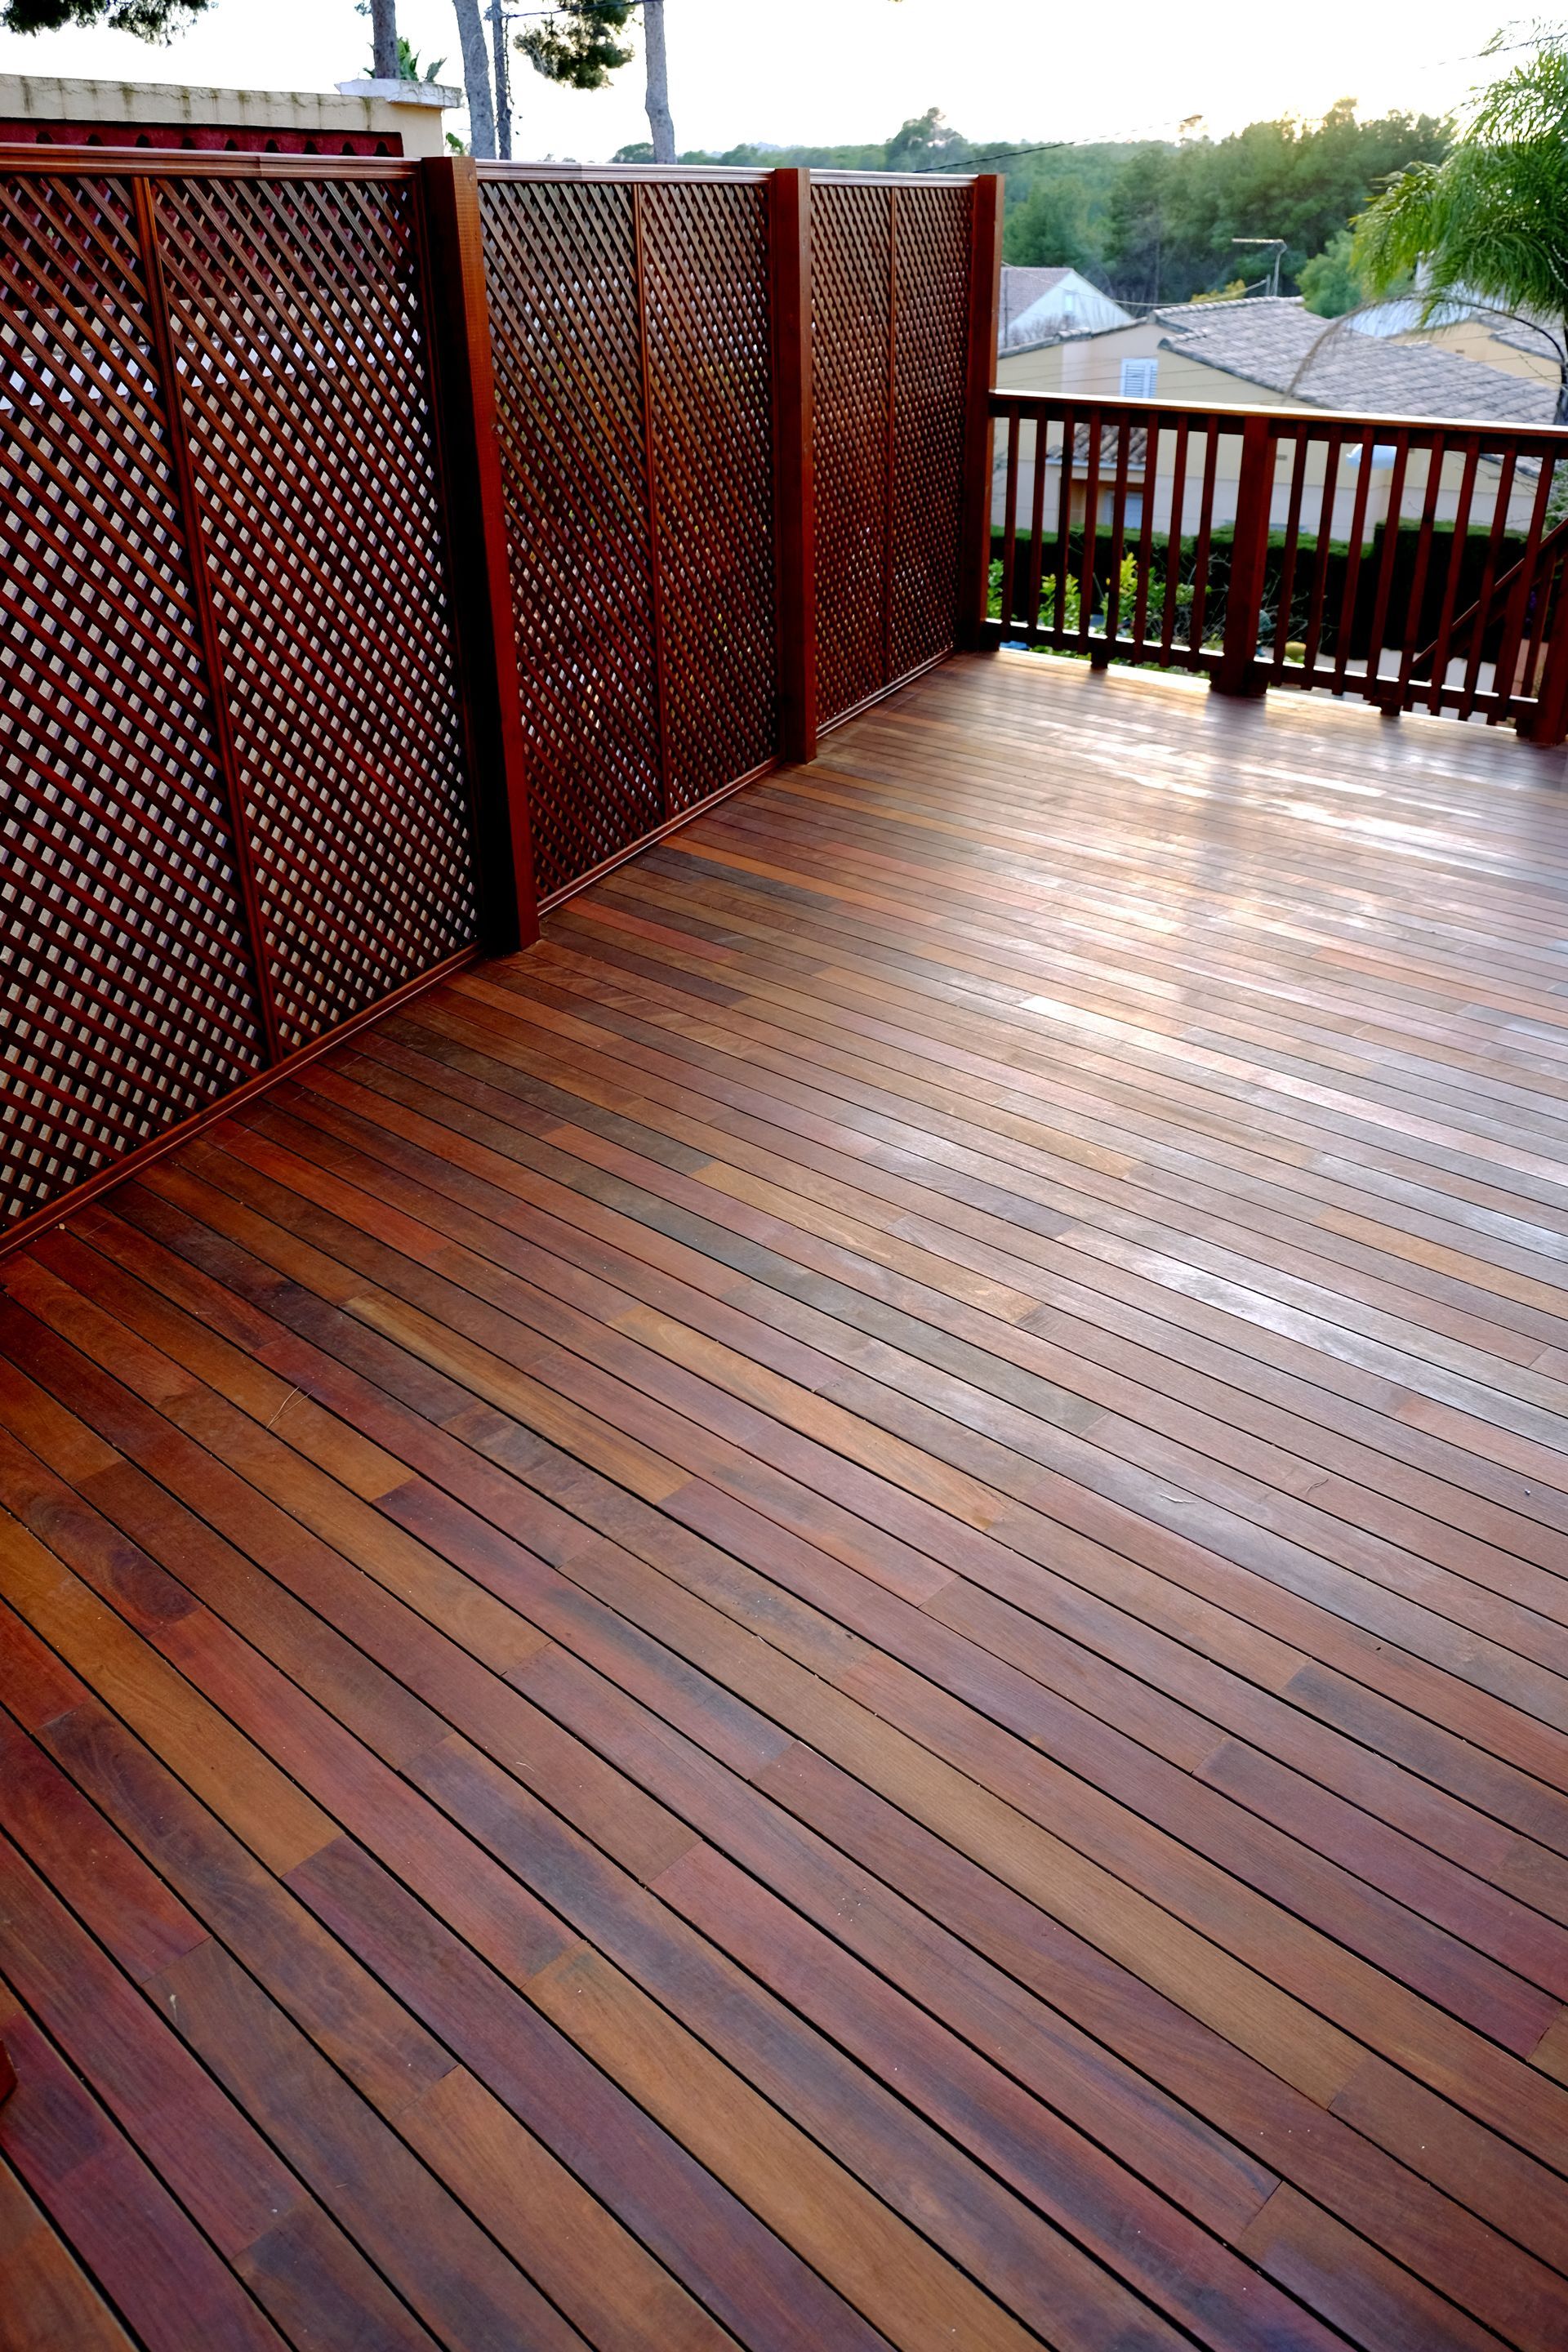 A wooden deck with a fence in the background